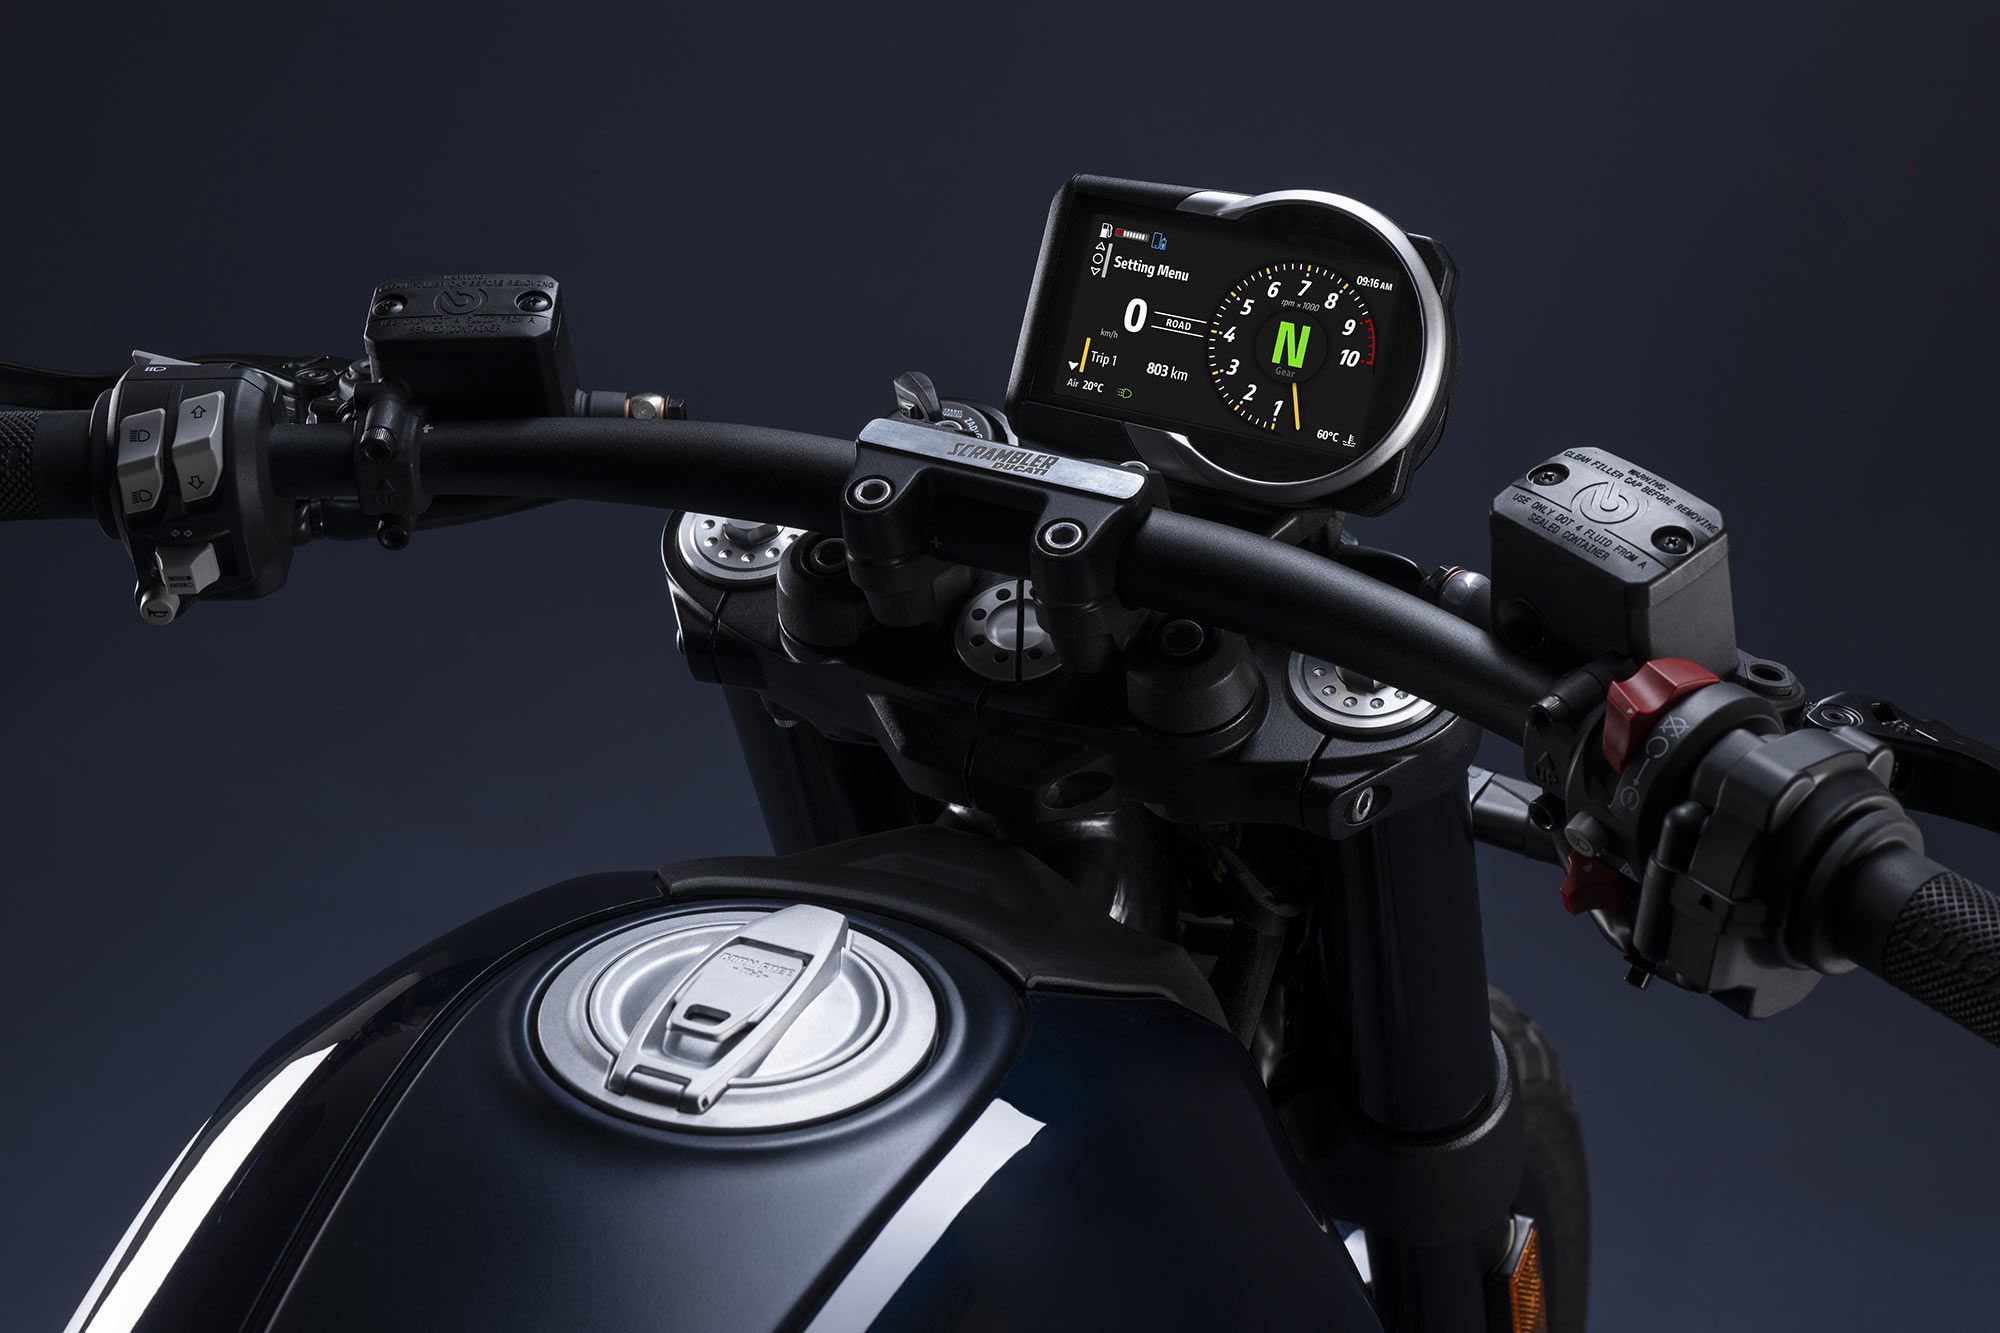 A new 4.3-inch color TFT instrument panel provides ride mode info and can connect to the optional Ducati Multimedia System.